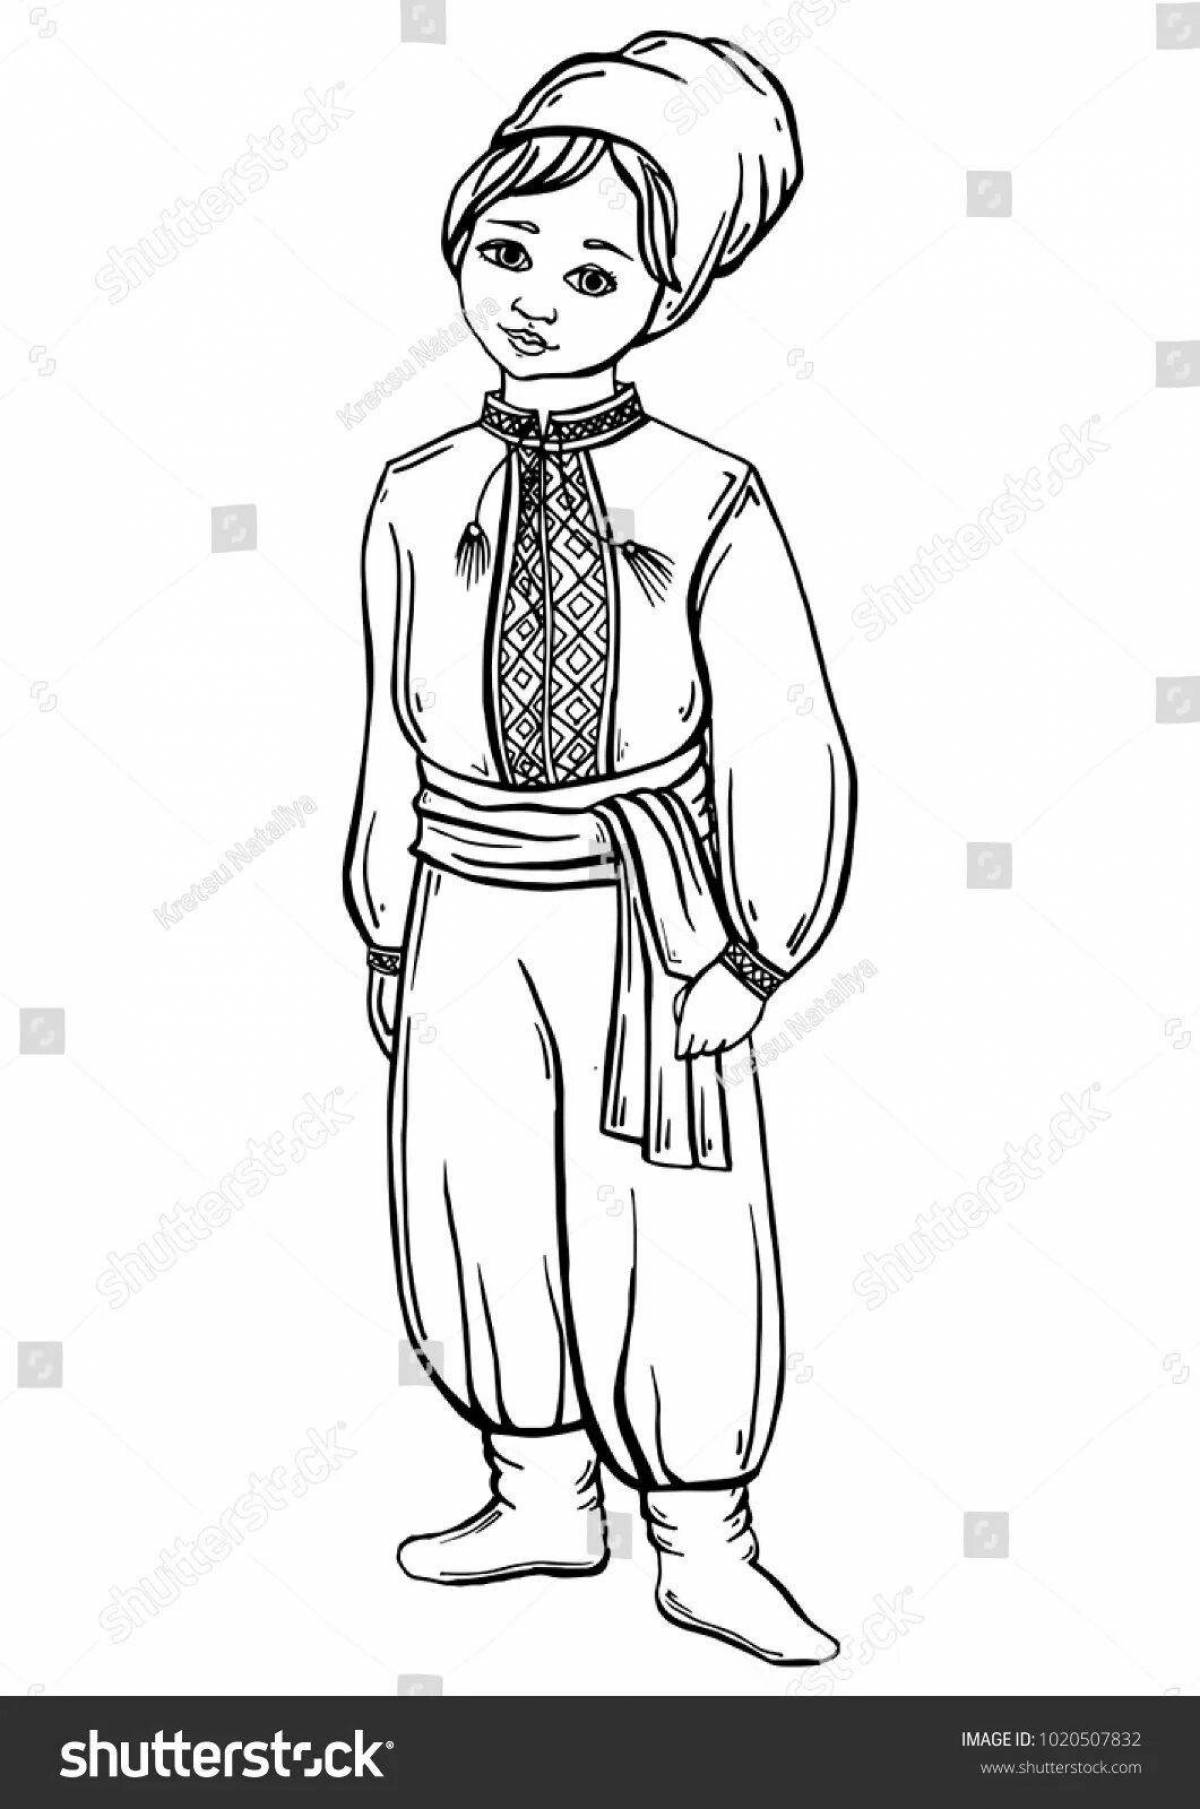 Coloring page Cossack festive costume